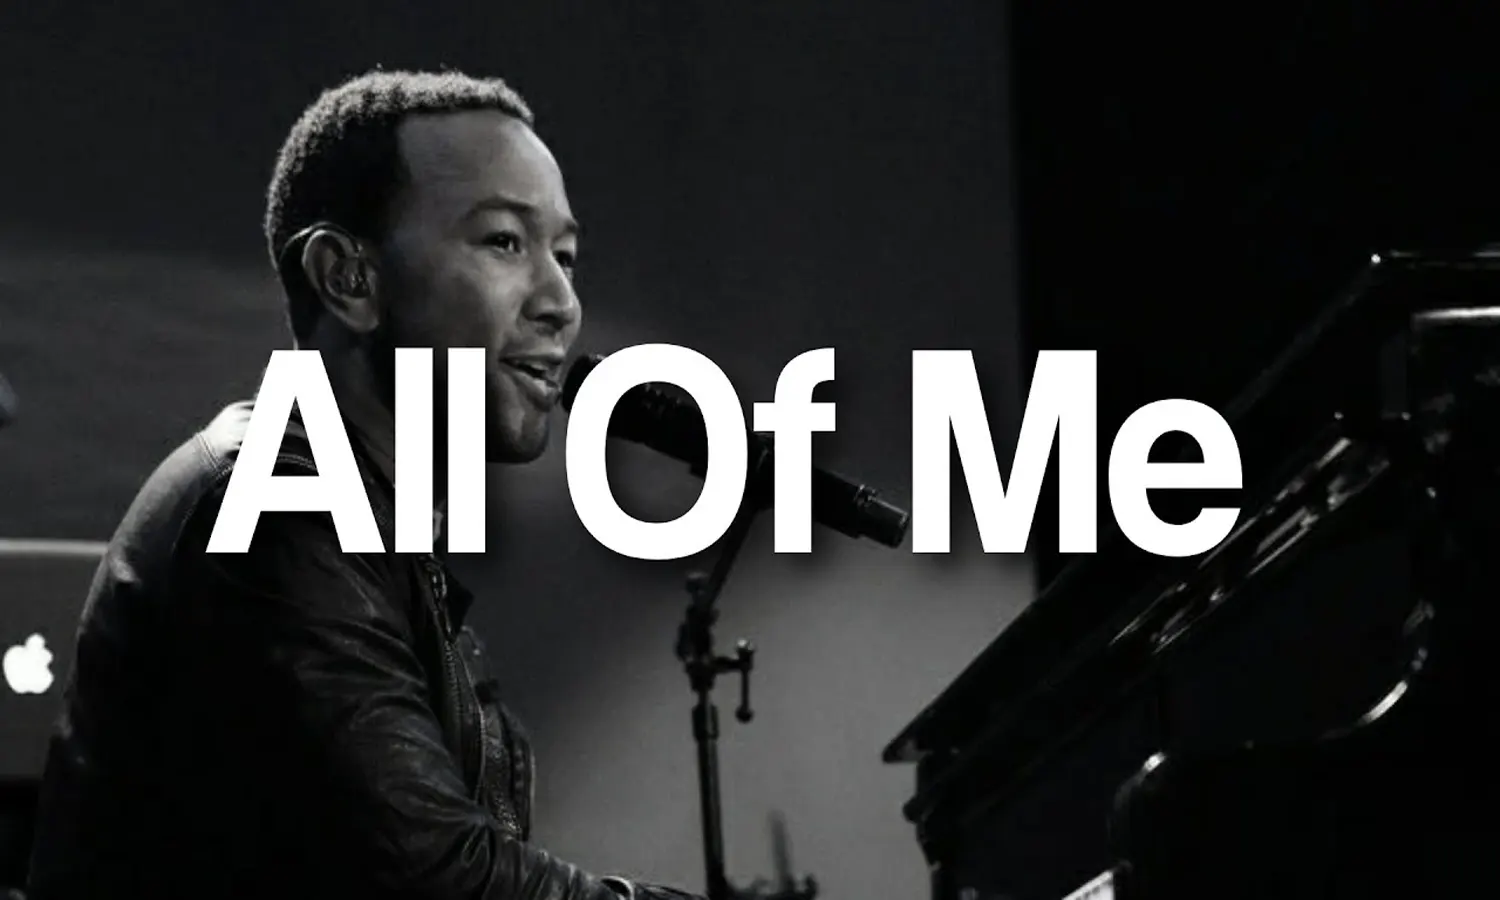 All of my John Legend. All of me John Legend Cover. All of you John Legend текст. Jones Legend all of me.